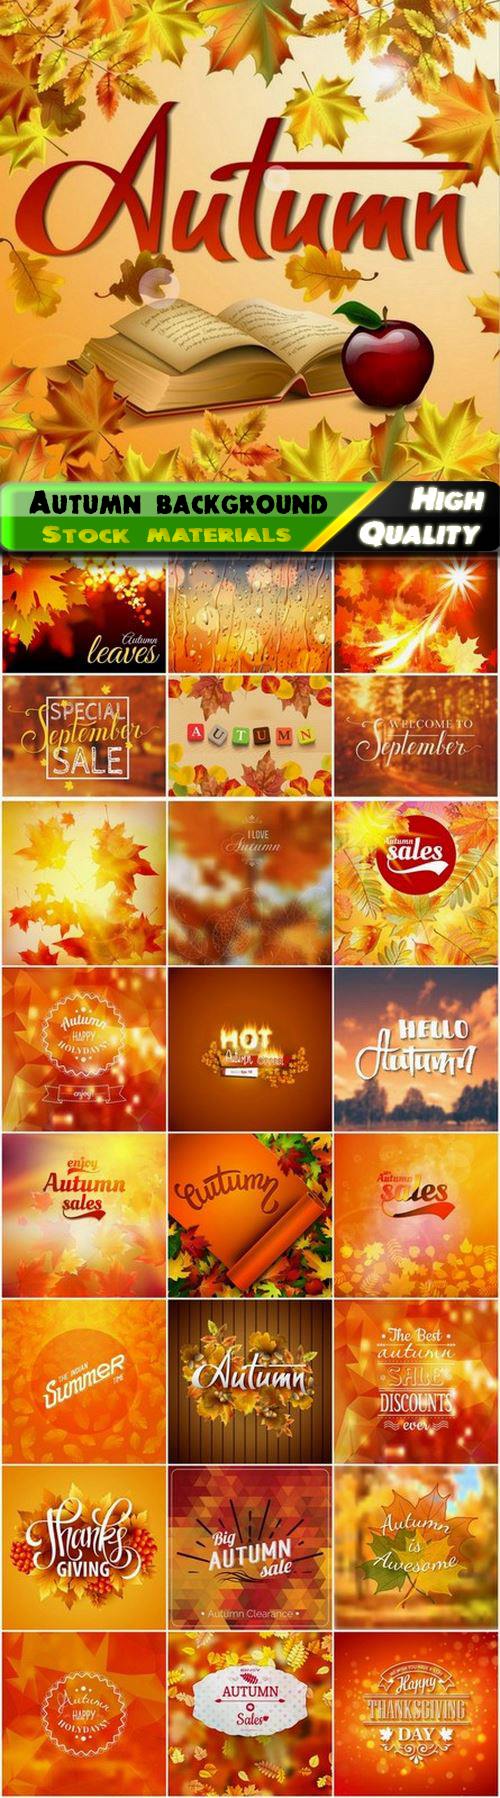 Autumn blurred background with yellowed leaves and sparks - 25 Eps